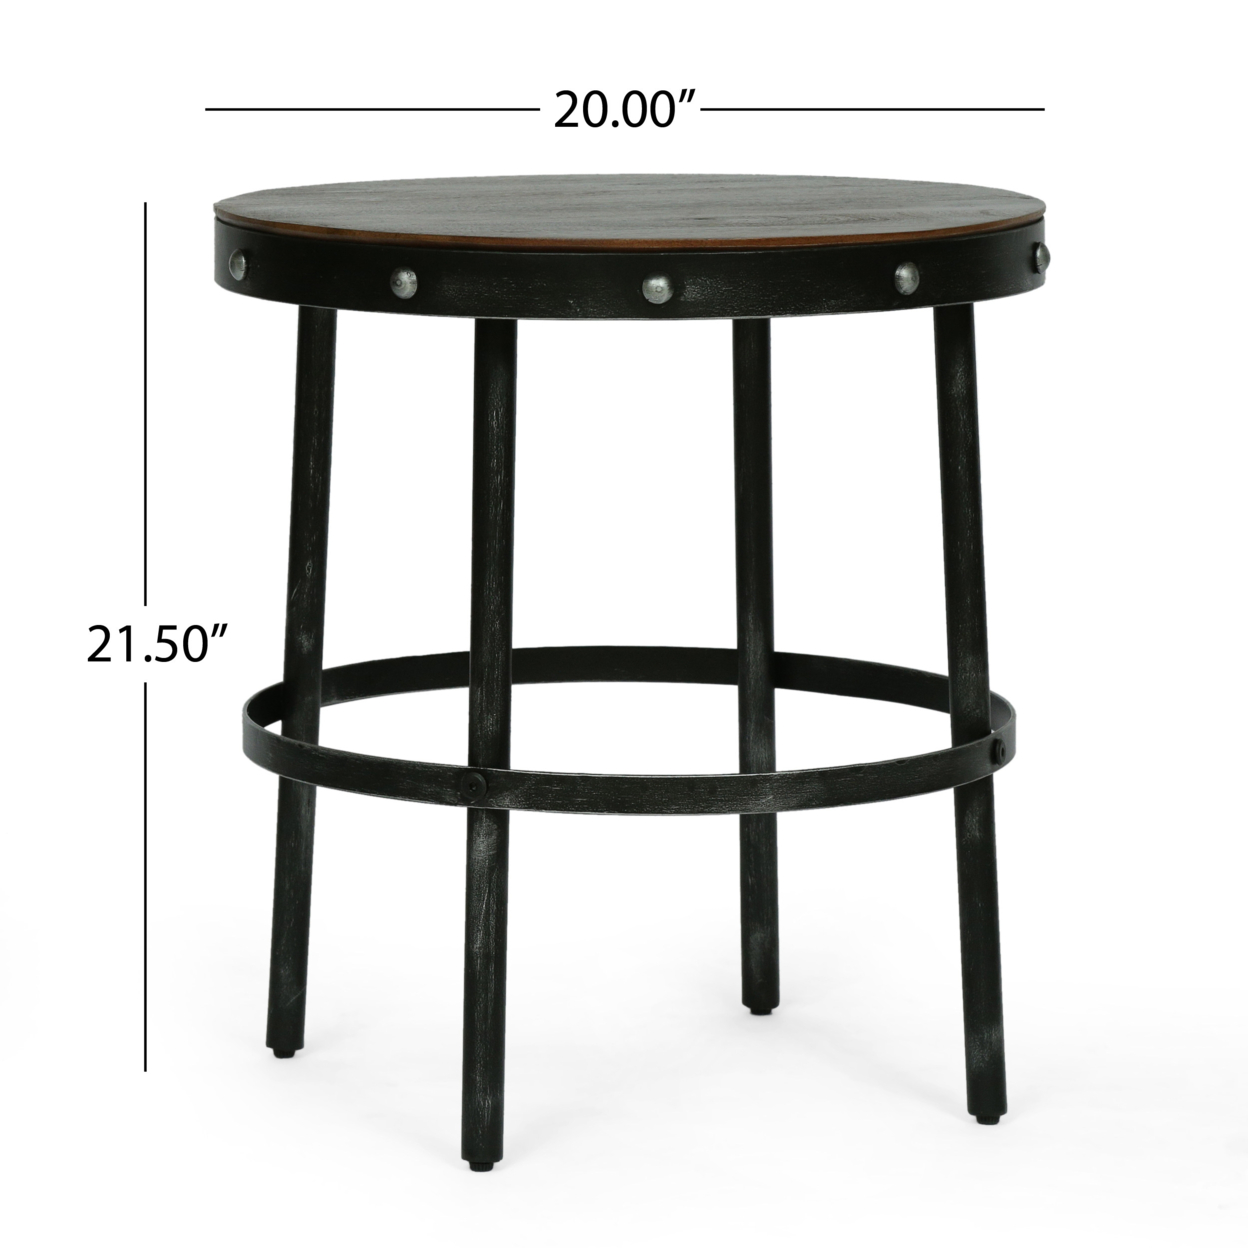 Clopton Modern Industrial Handcrafted Round Mango Wood Side Table, Brown And Antique Gunmetal